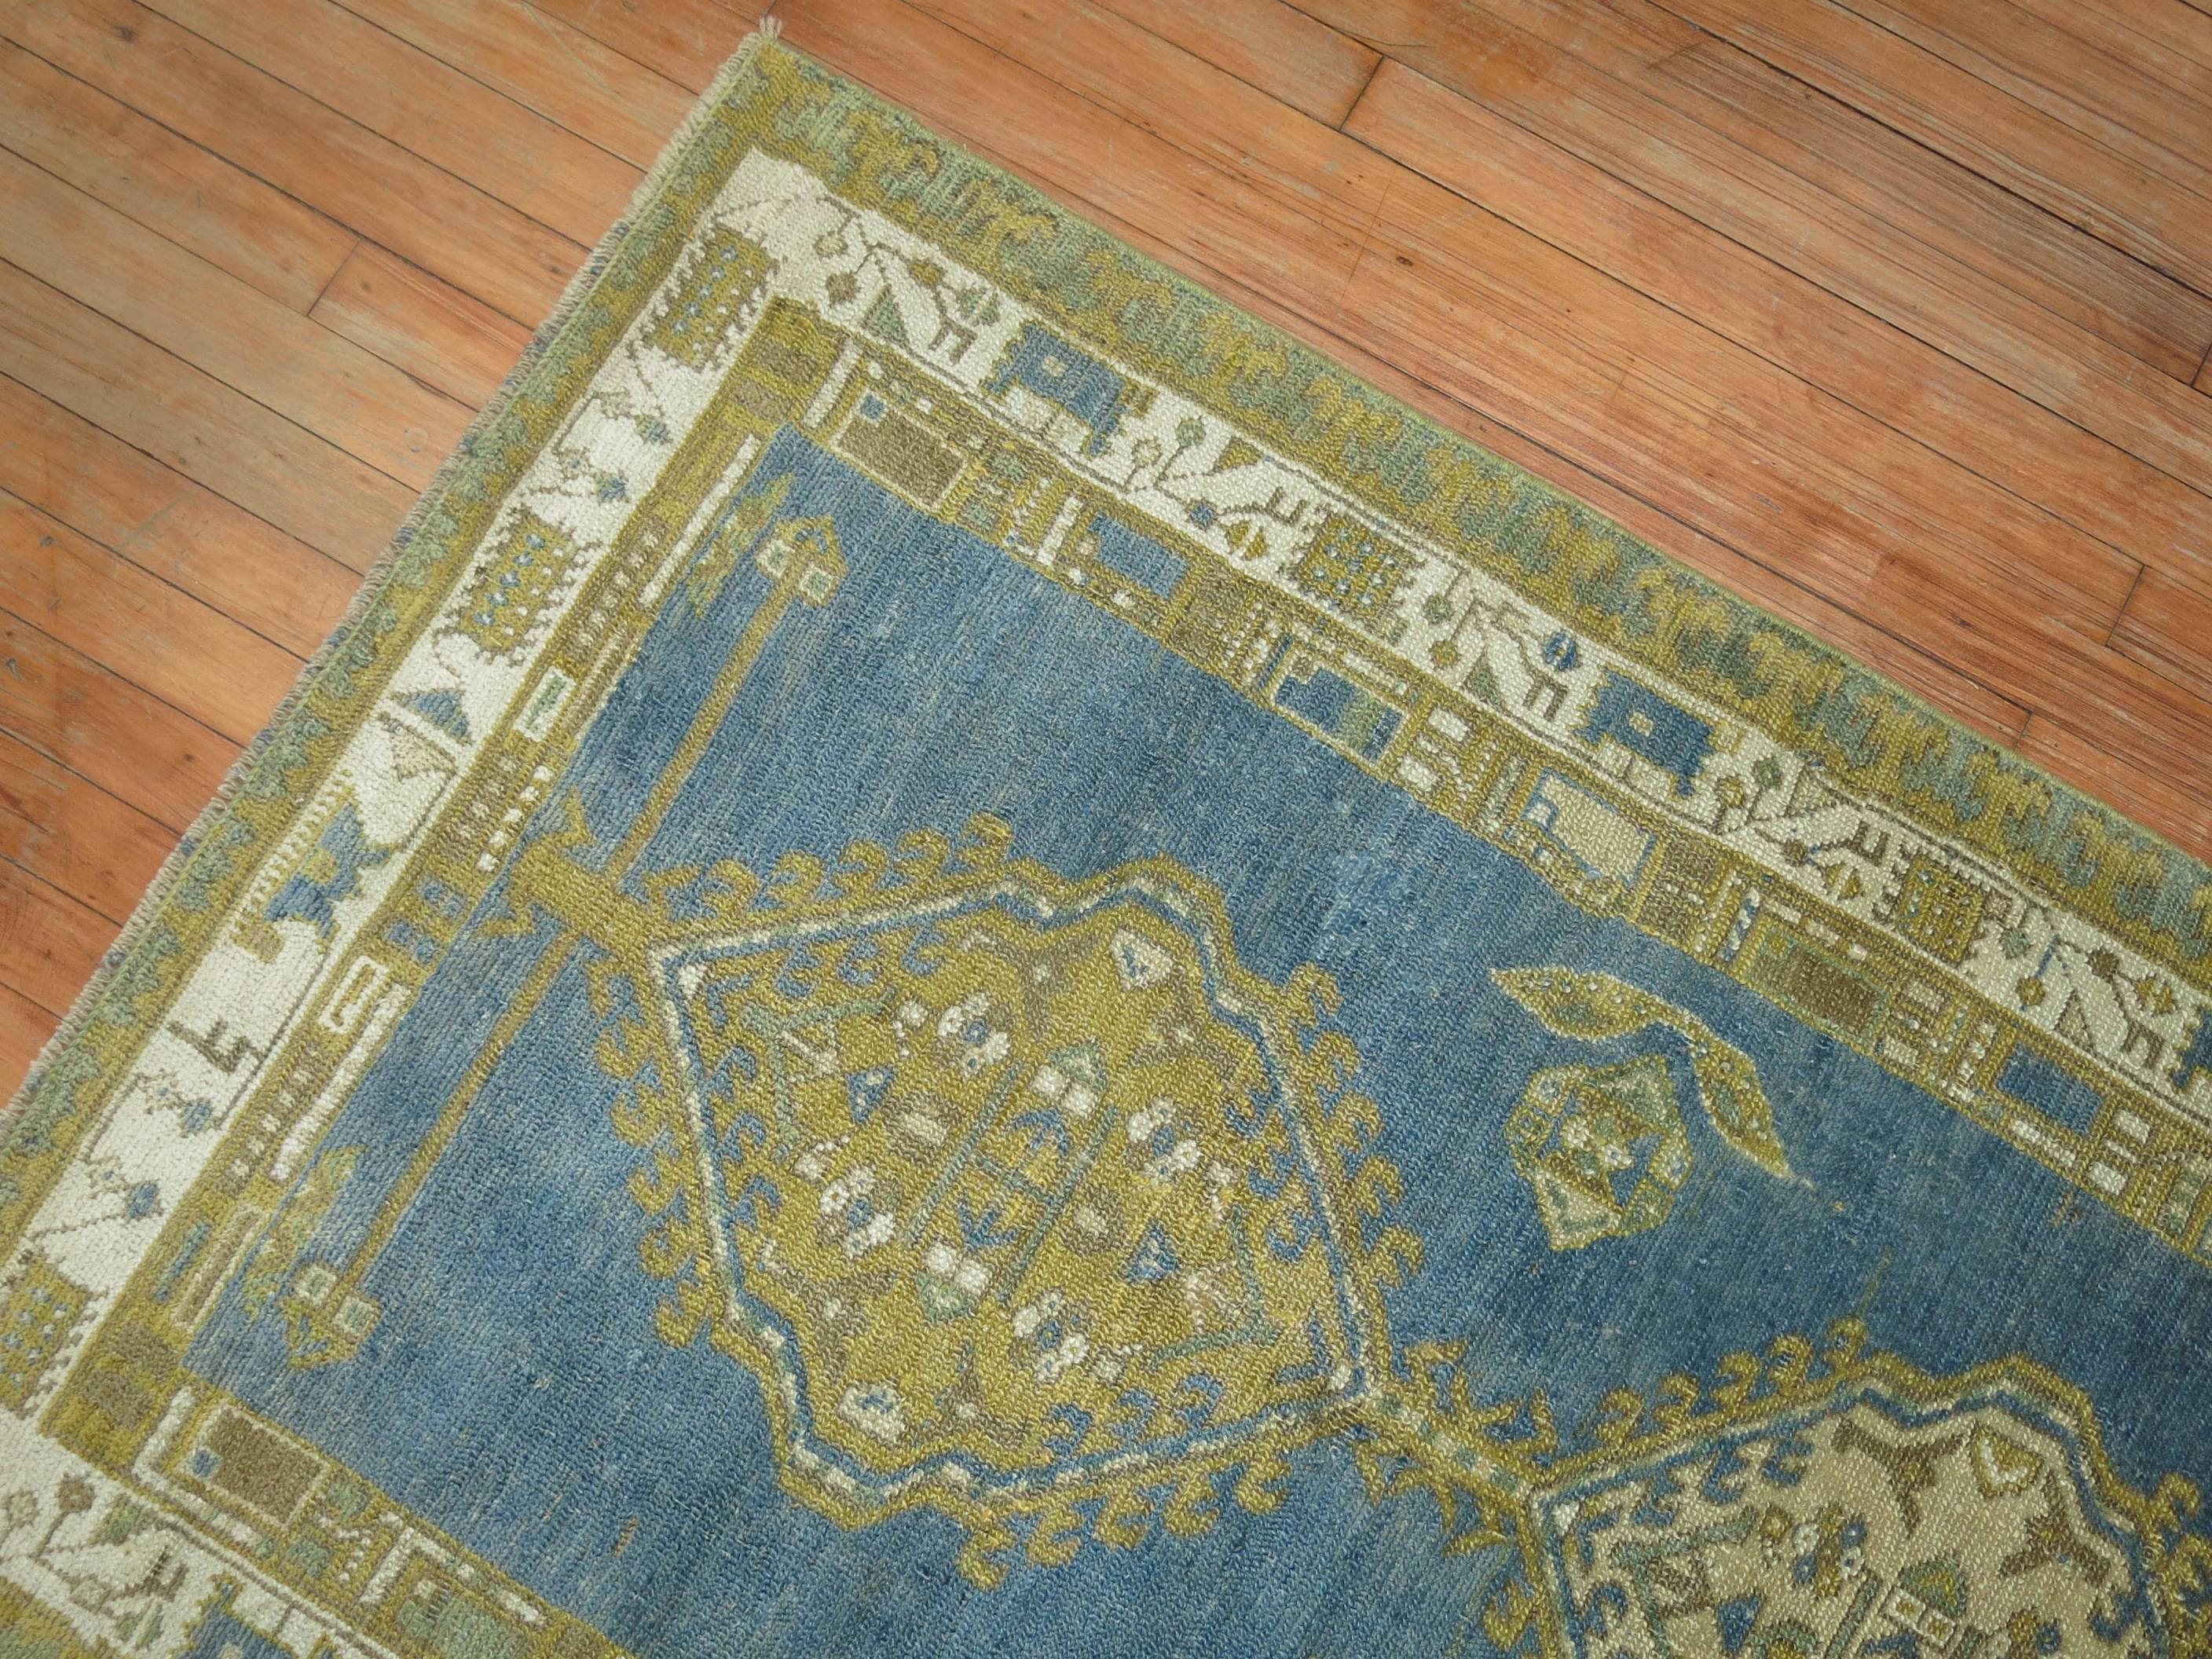 Hand-Woven Antique Persian Runner in Sky Blue and Green